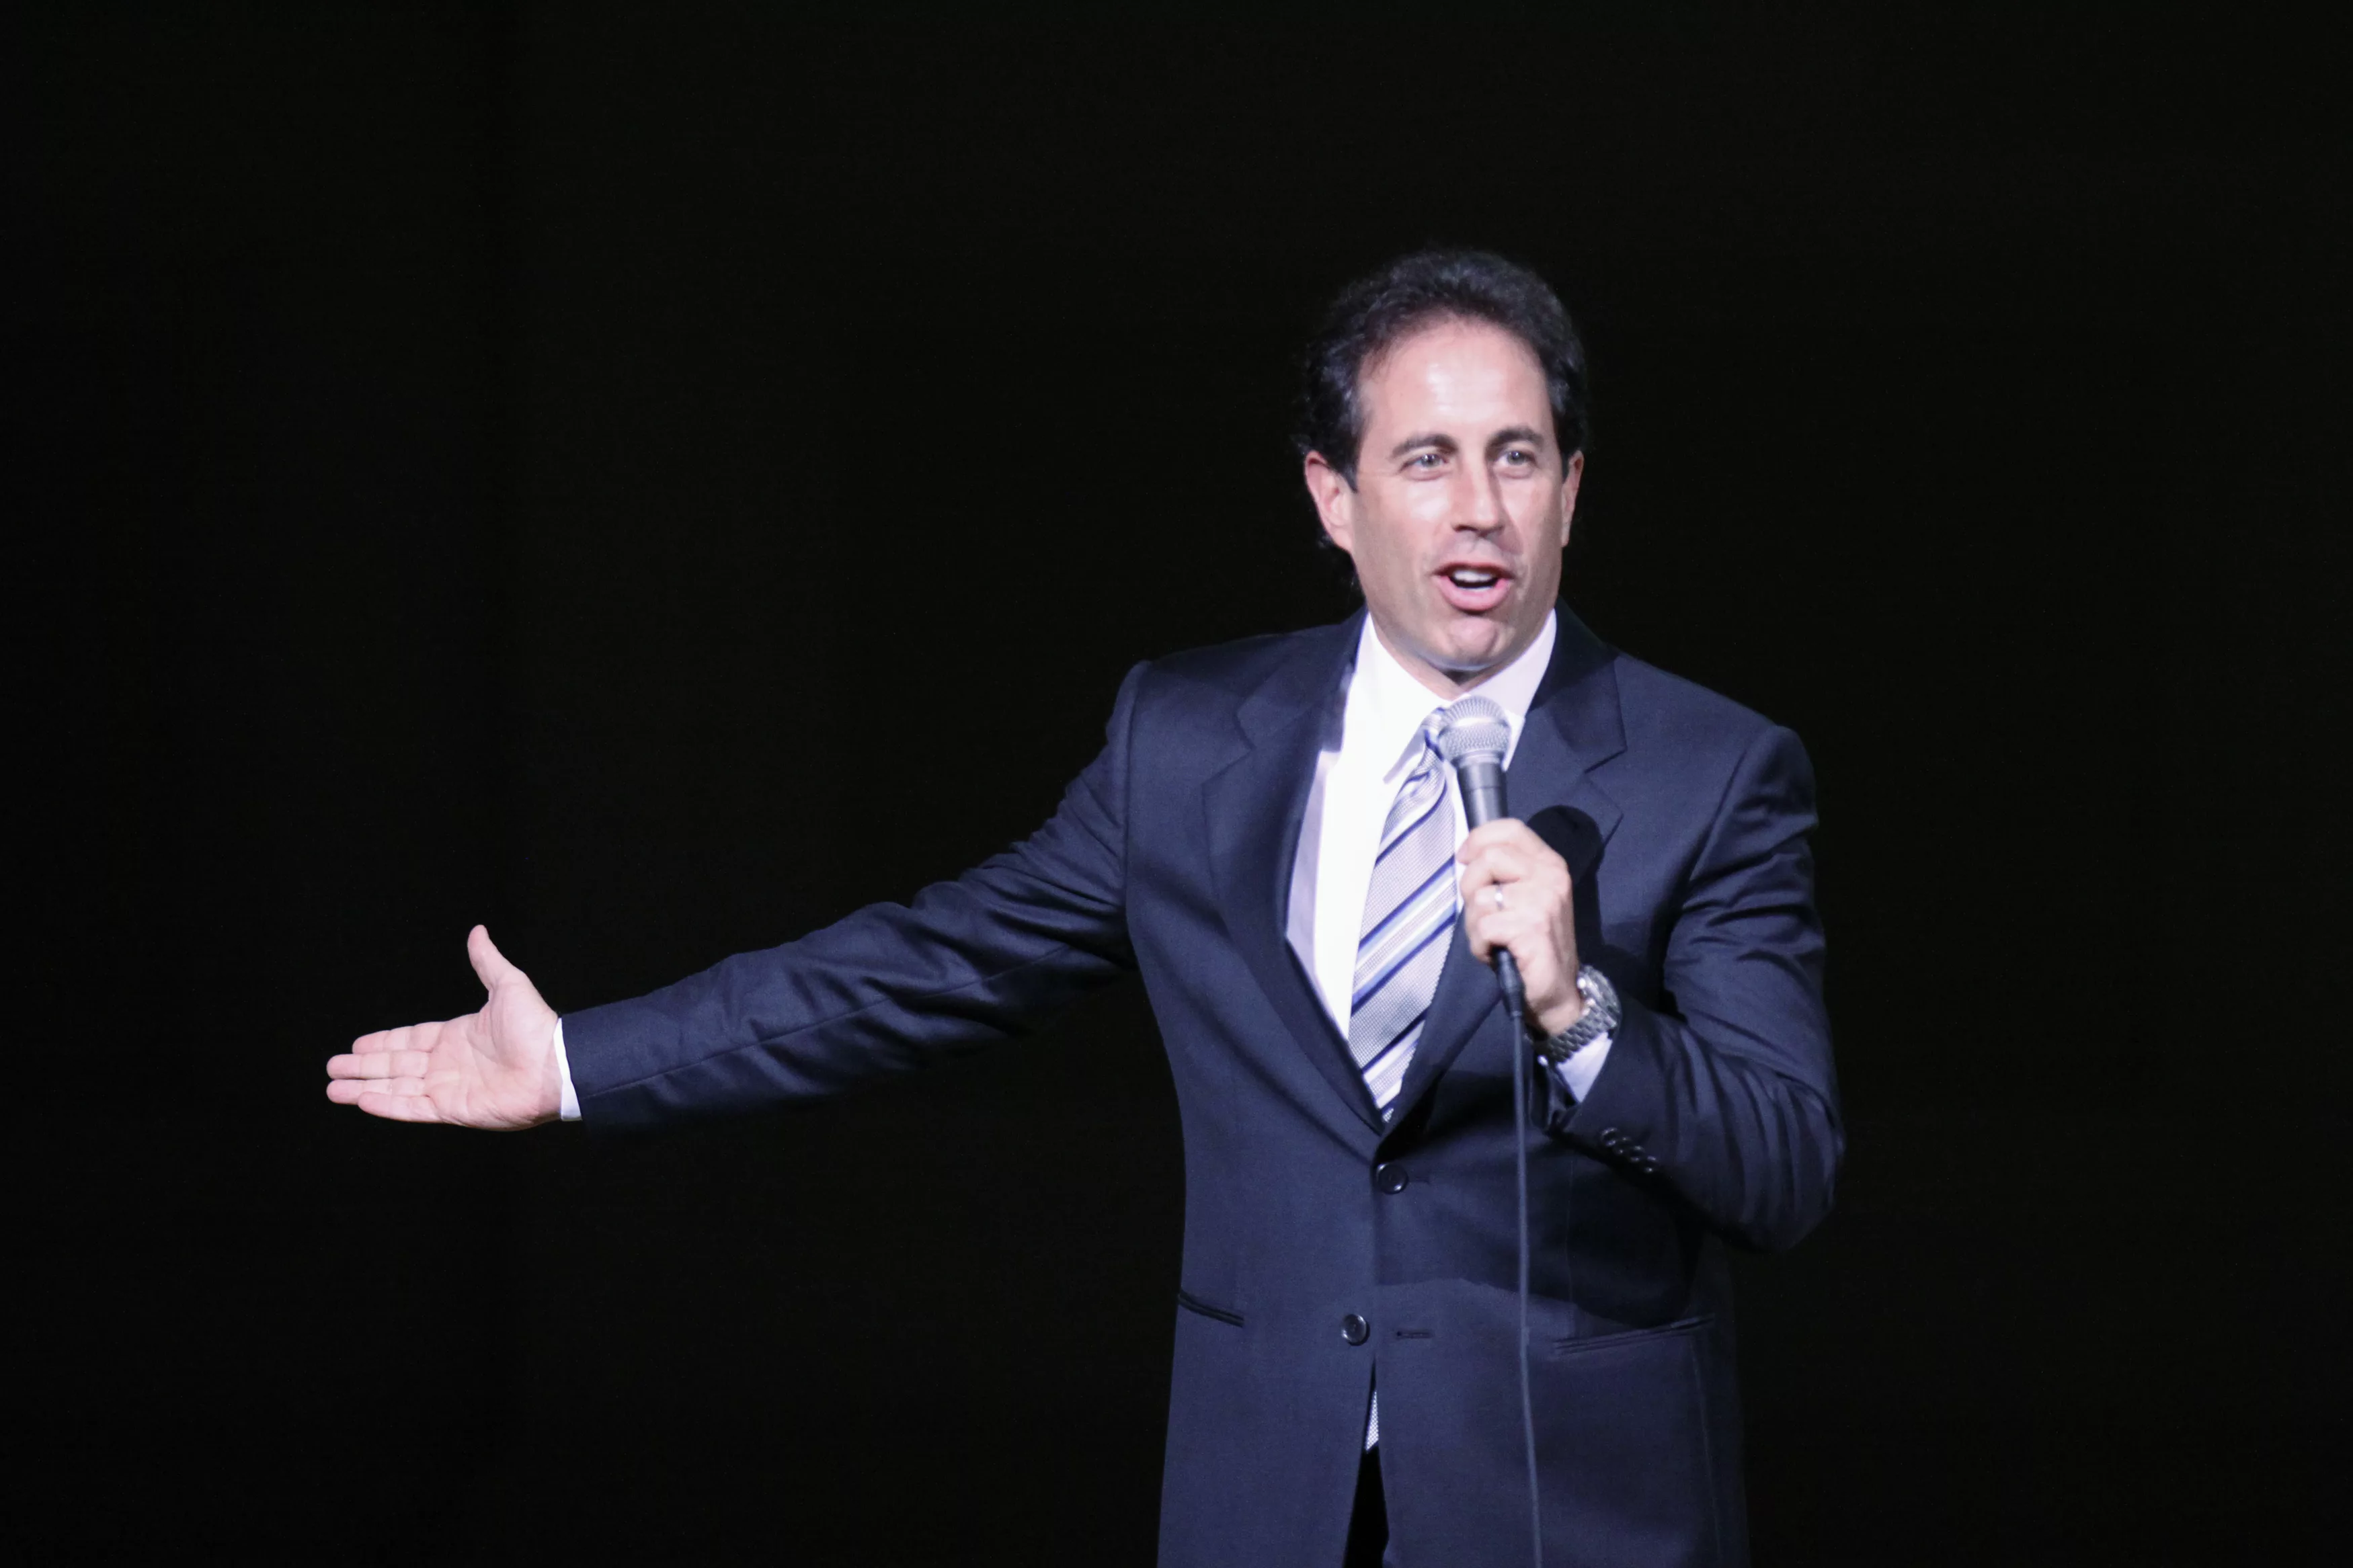 comedian-jerry-seinfeld-is-seen-on-stage-while-he-performs-at-a-benefit-concert-for-autism-speaks-in-new-york